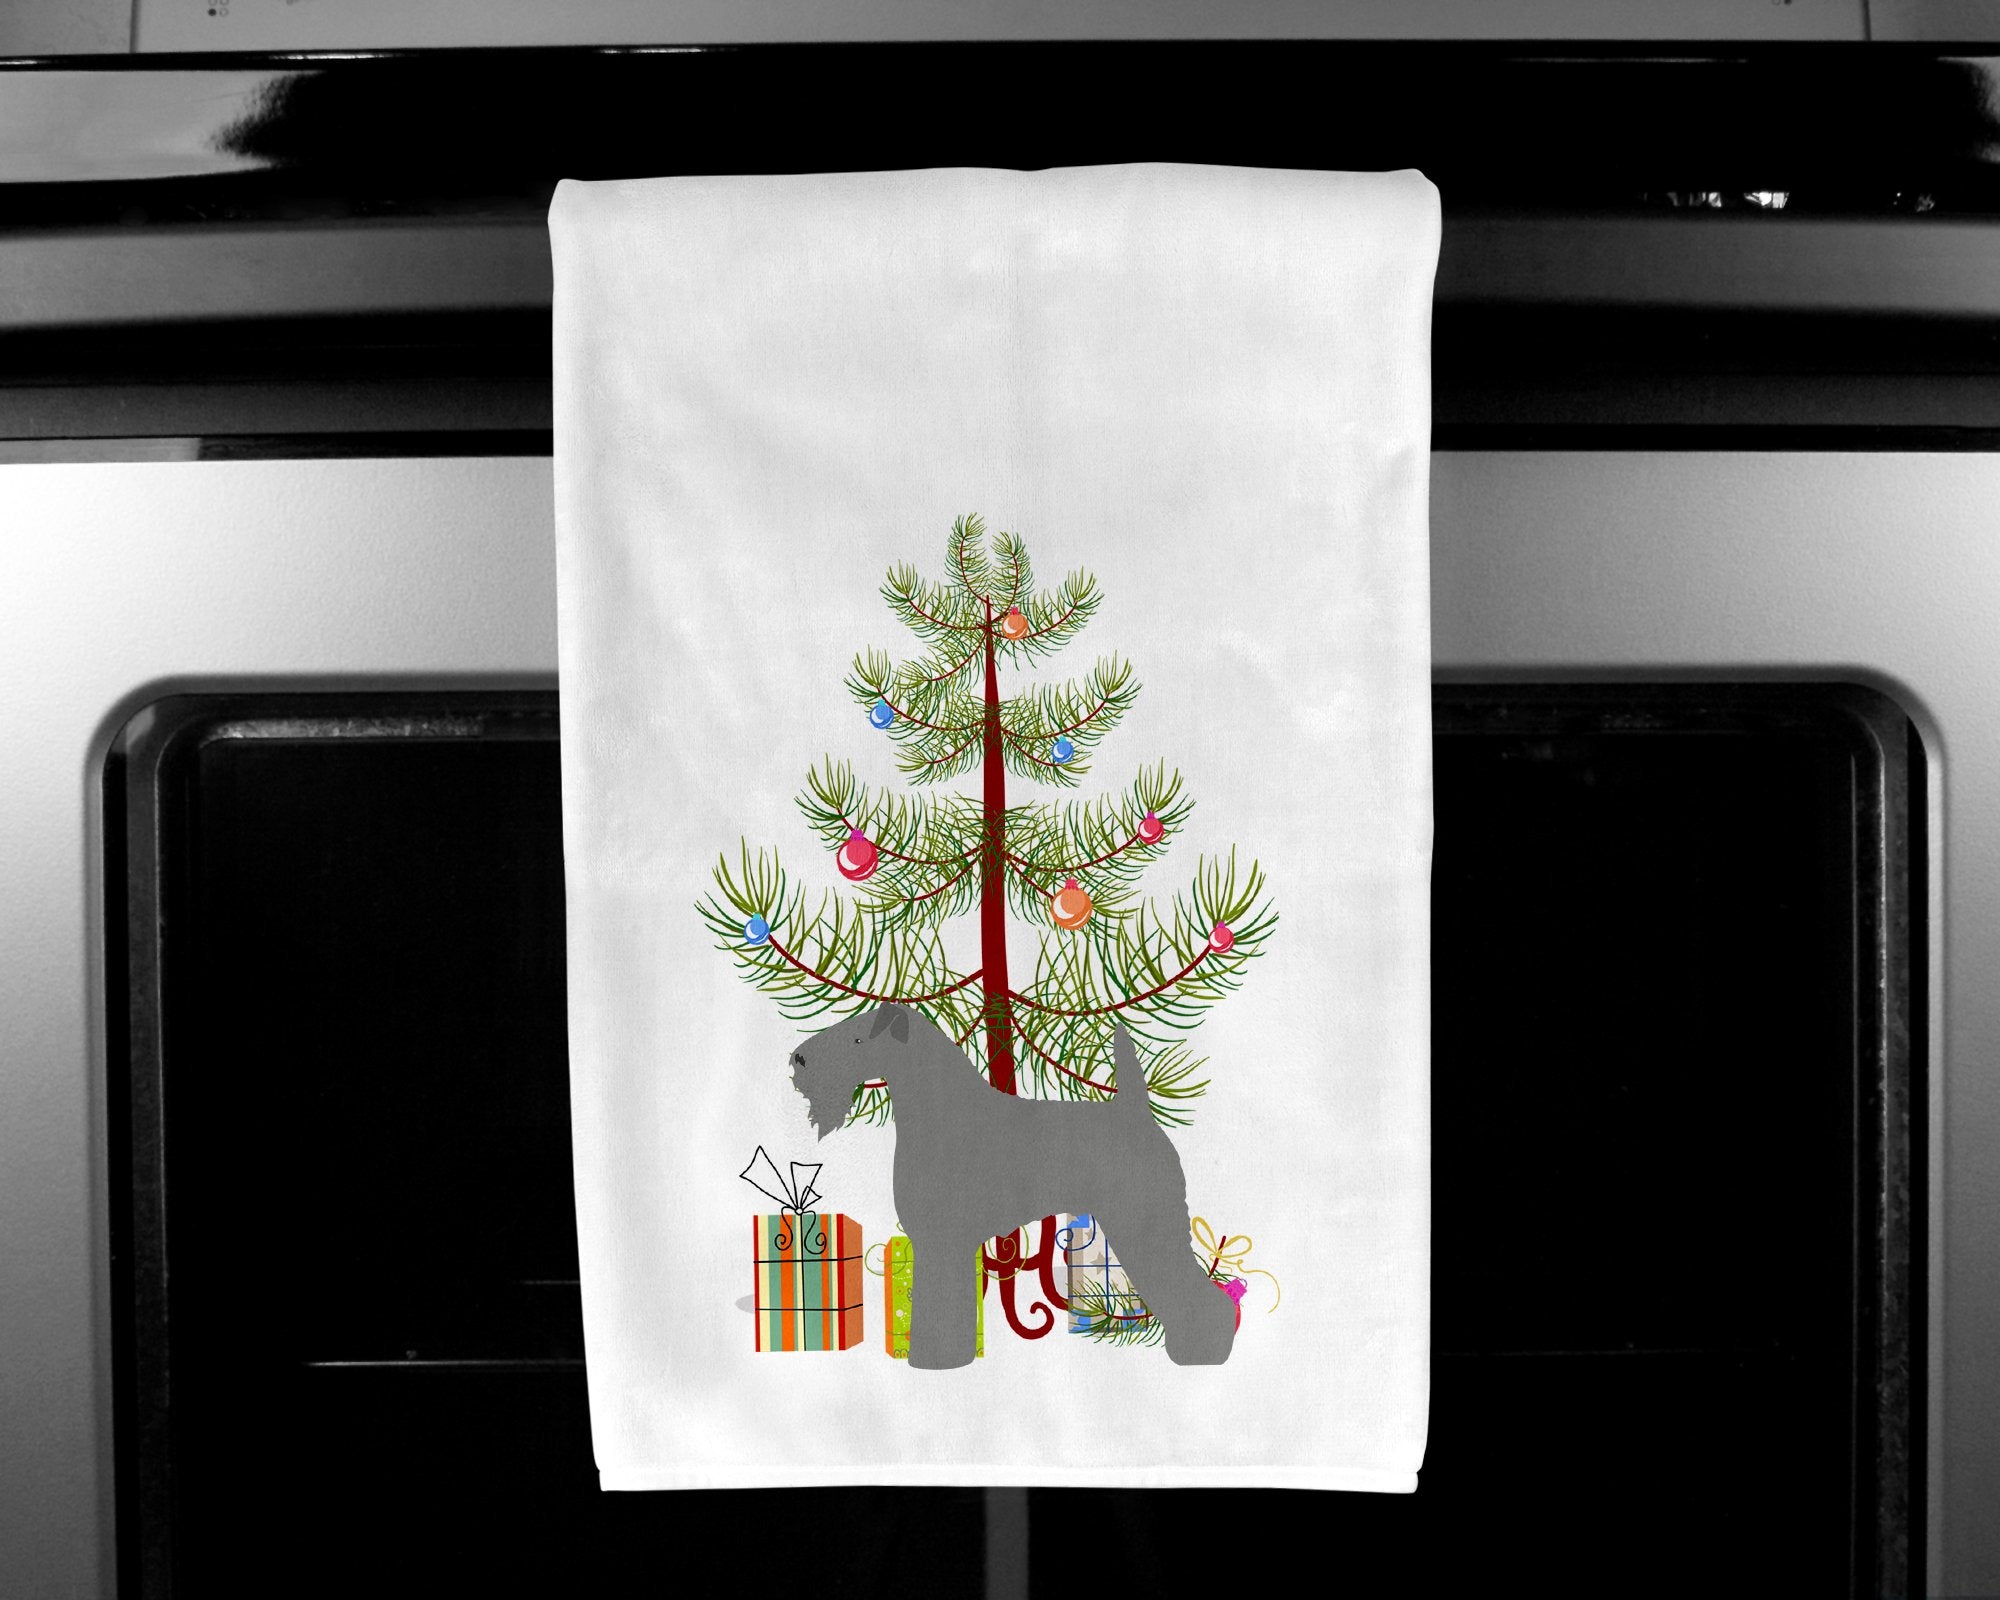 Kerry Blue Terrier Merry Christmas Tree White Kitchen Towel Set of 2 BB2910WTKT by Caroline's Treasures